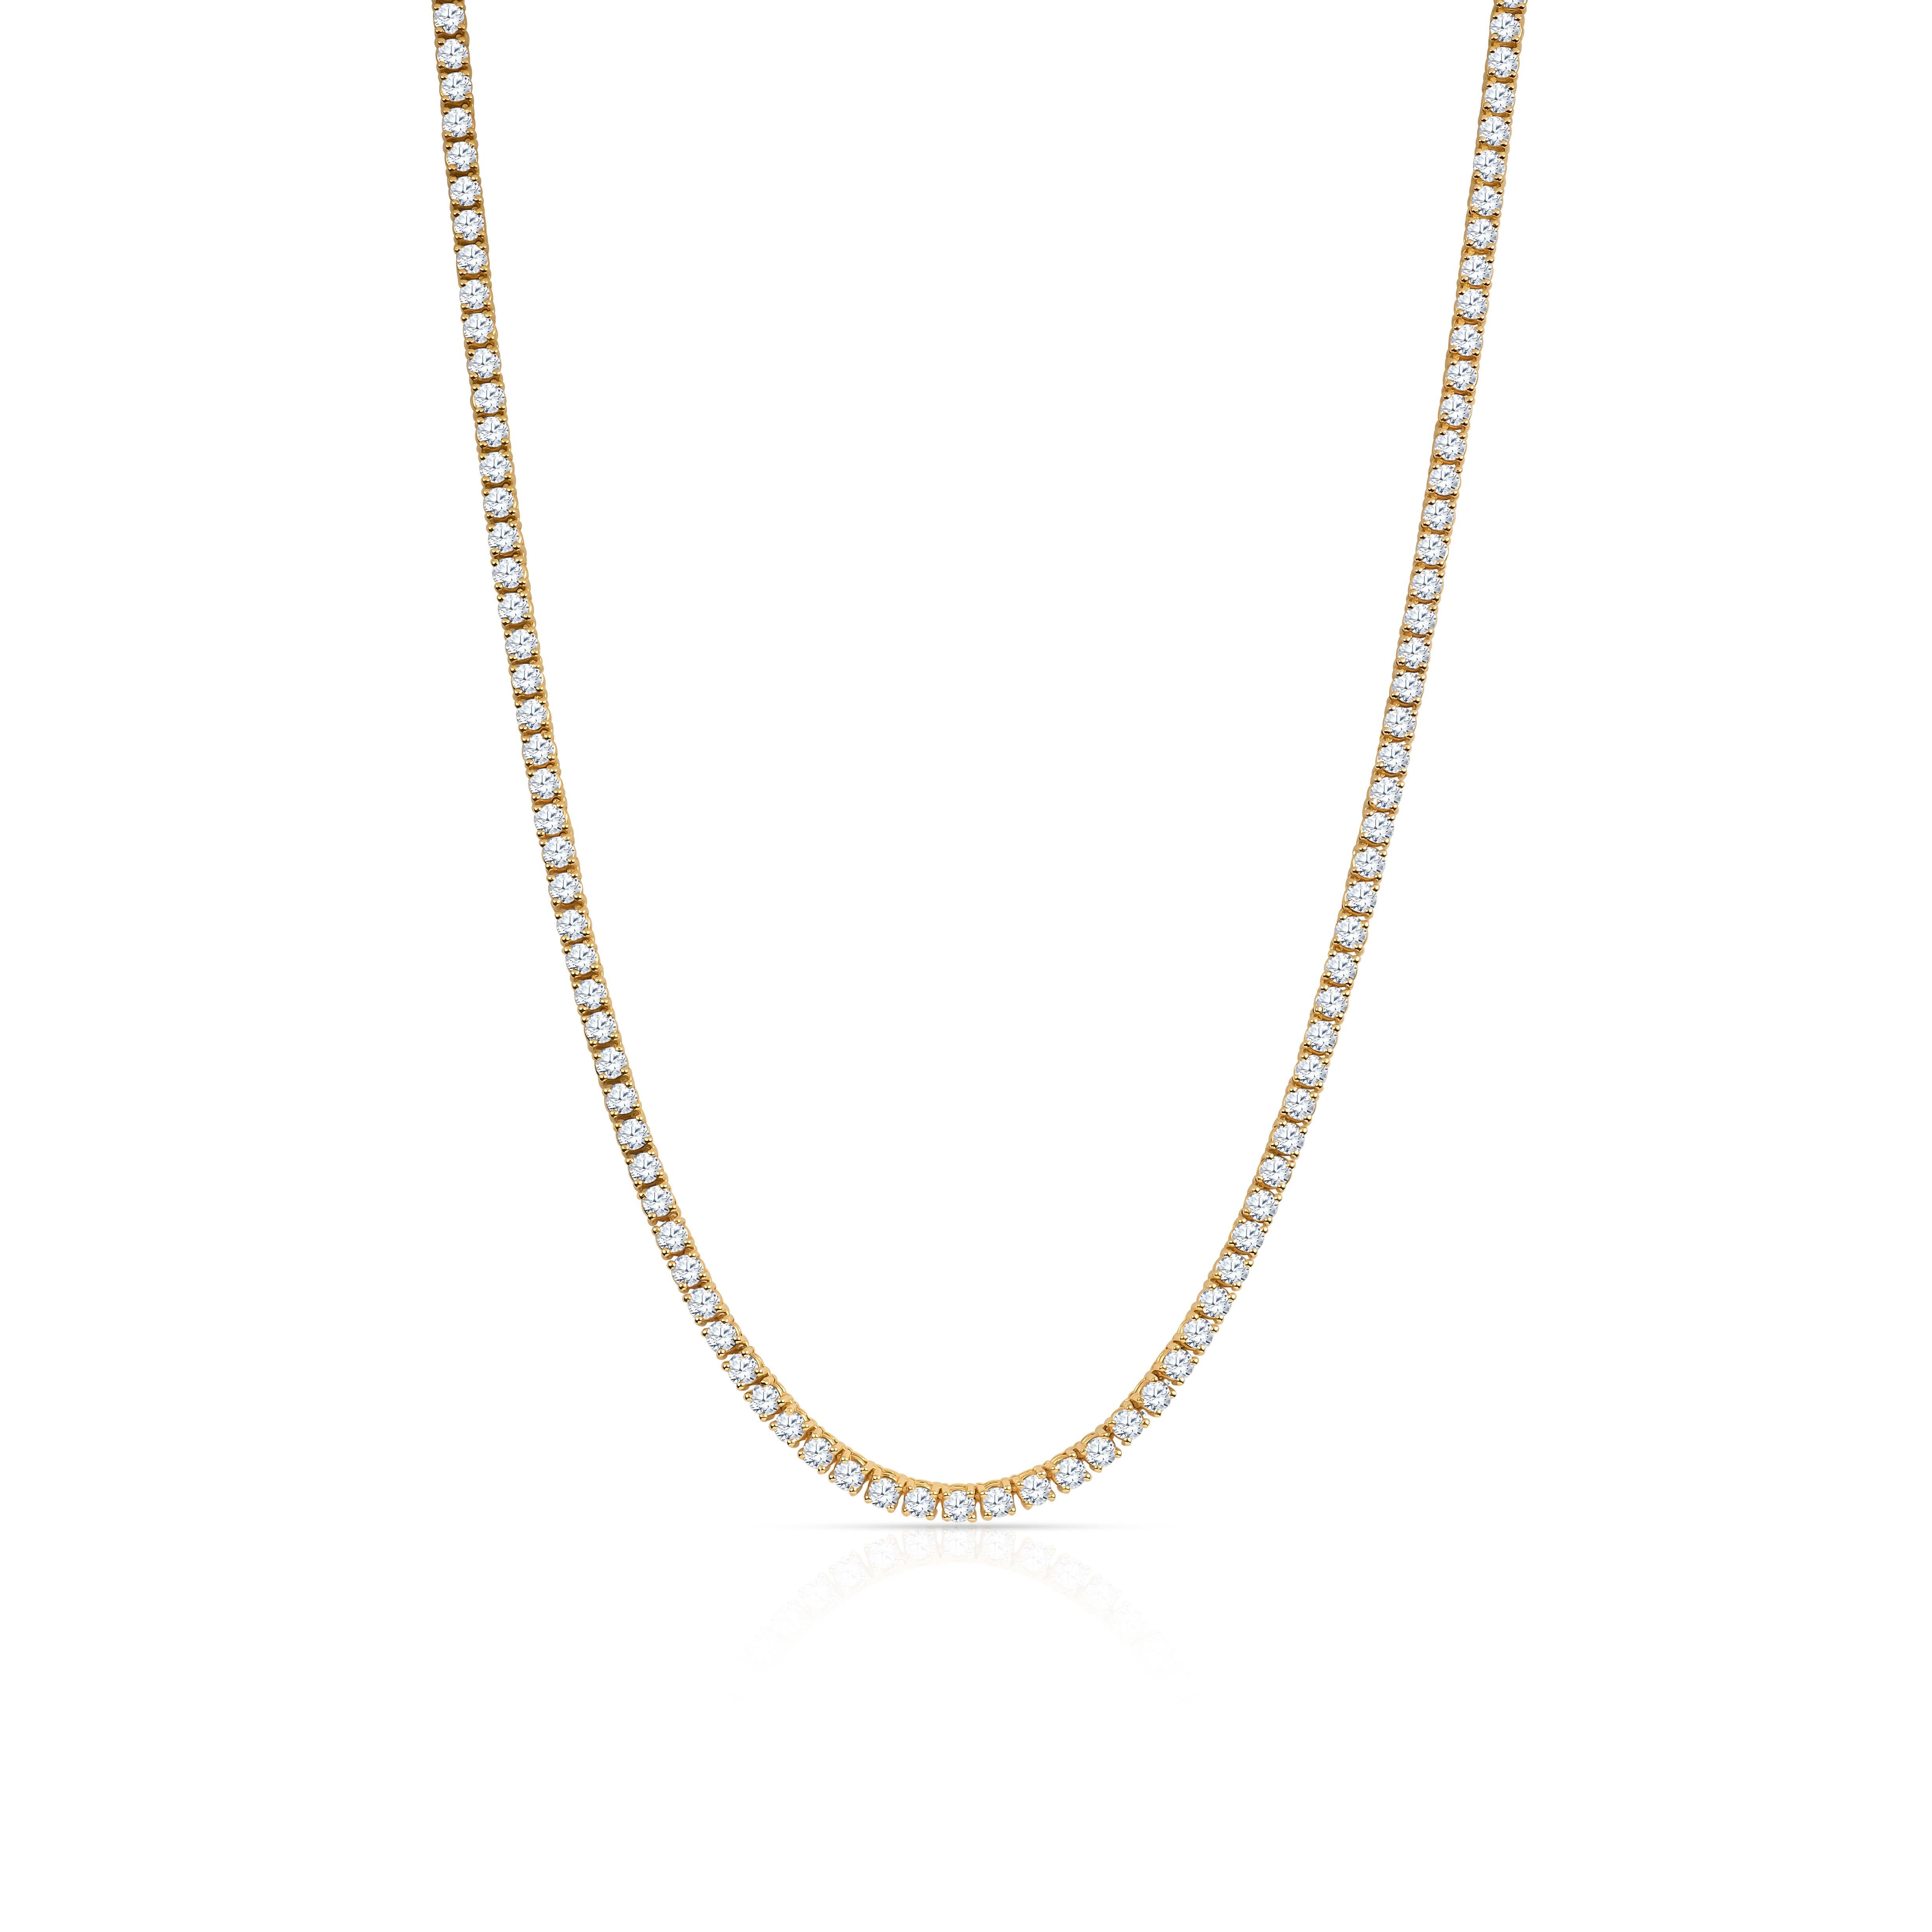 23.97 Carat total weight of round brilliant diamonds set in 14K yellow gold necklace with a total length of 23